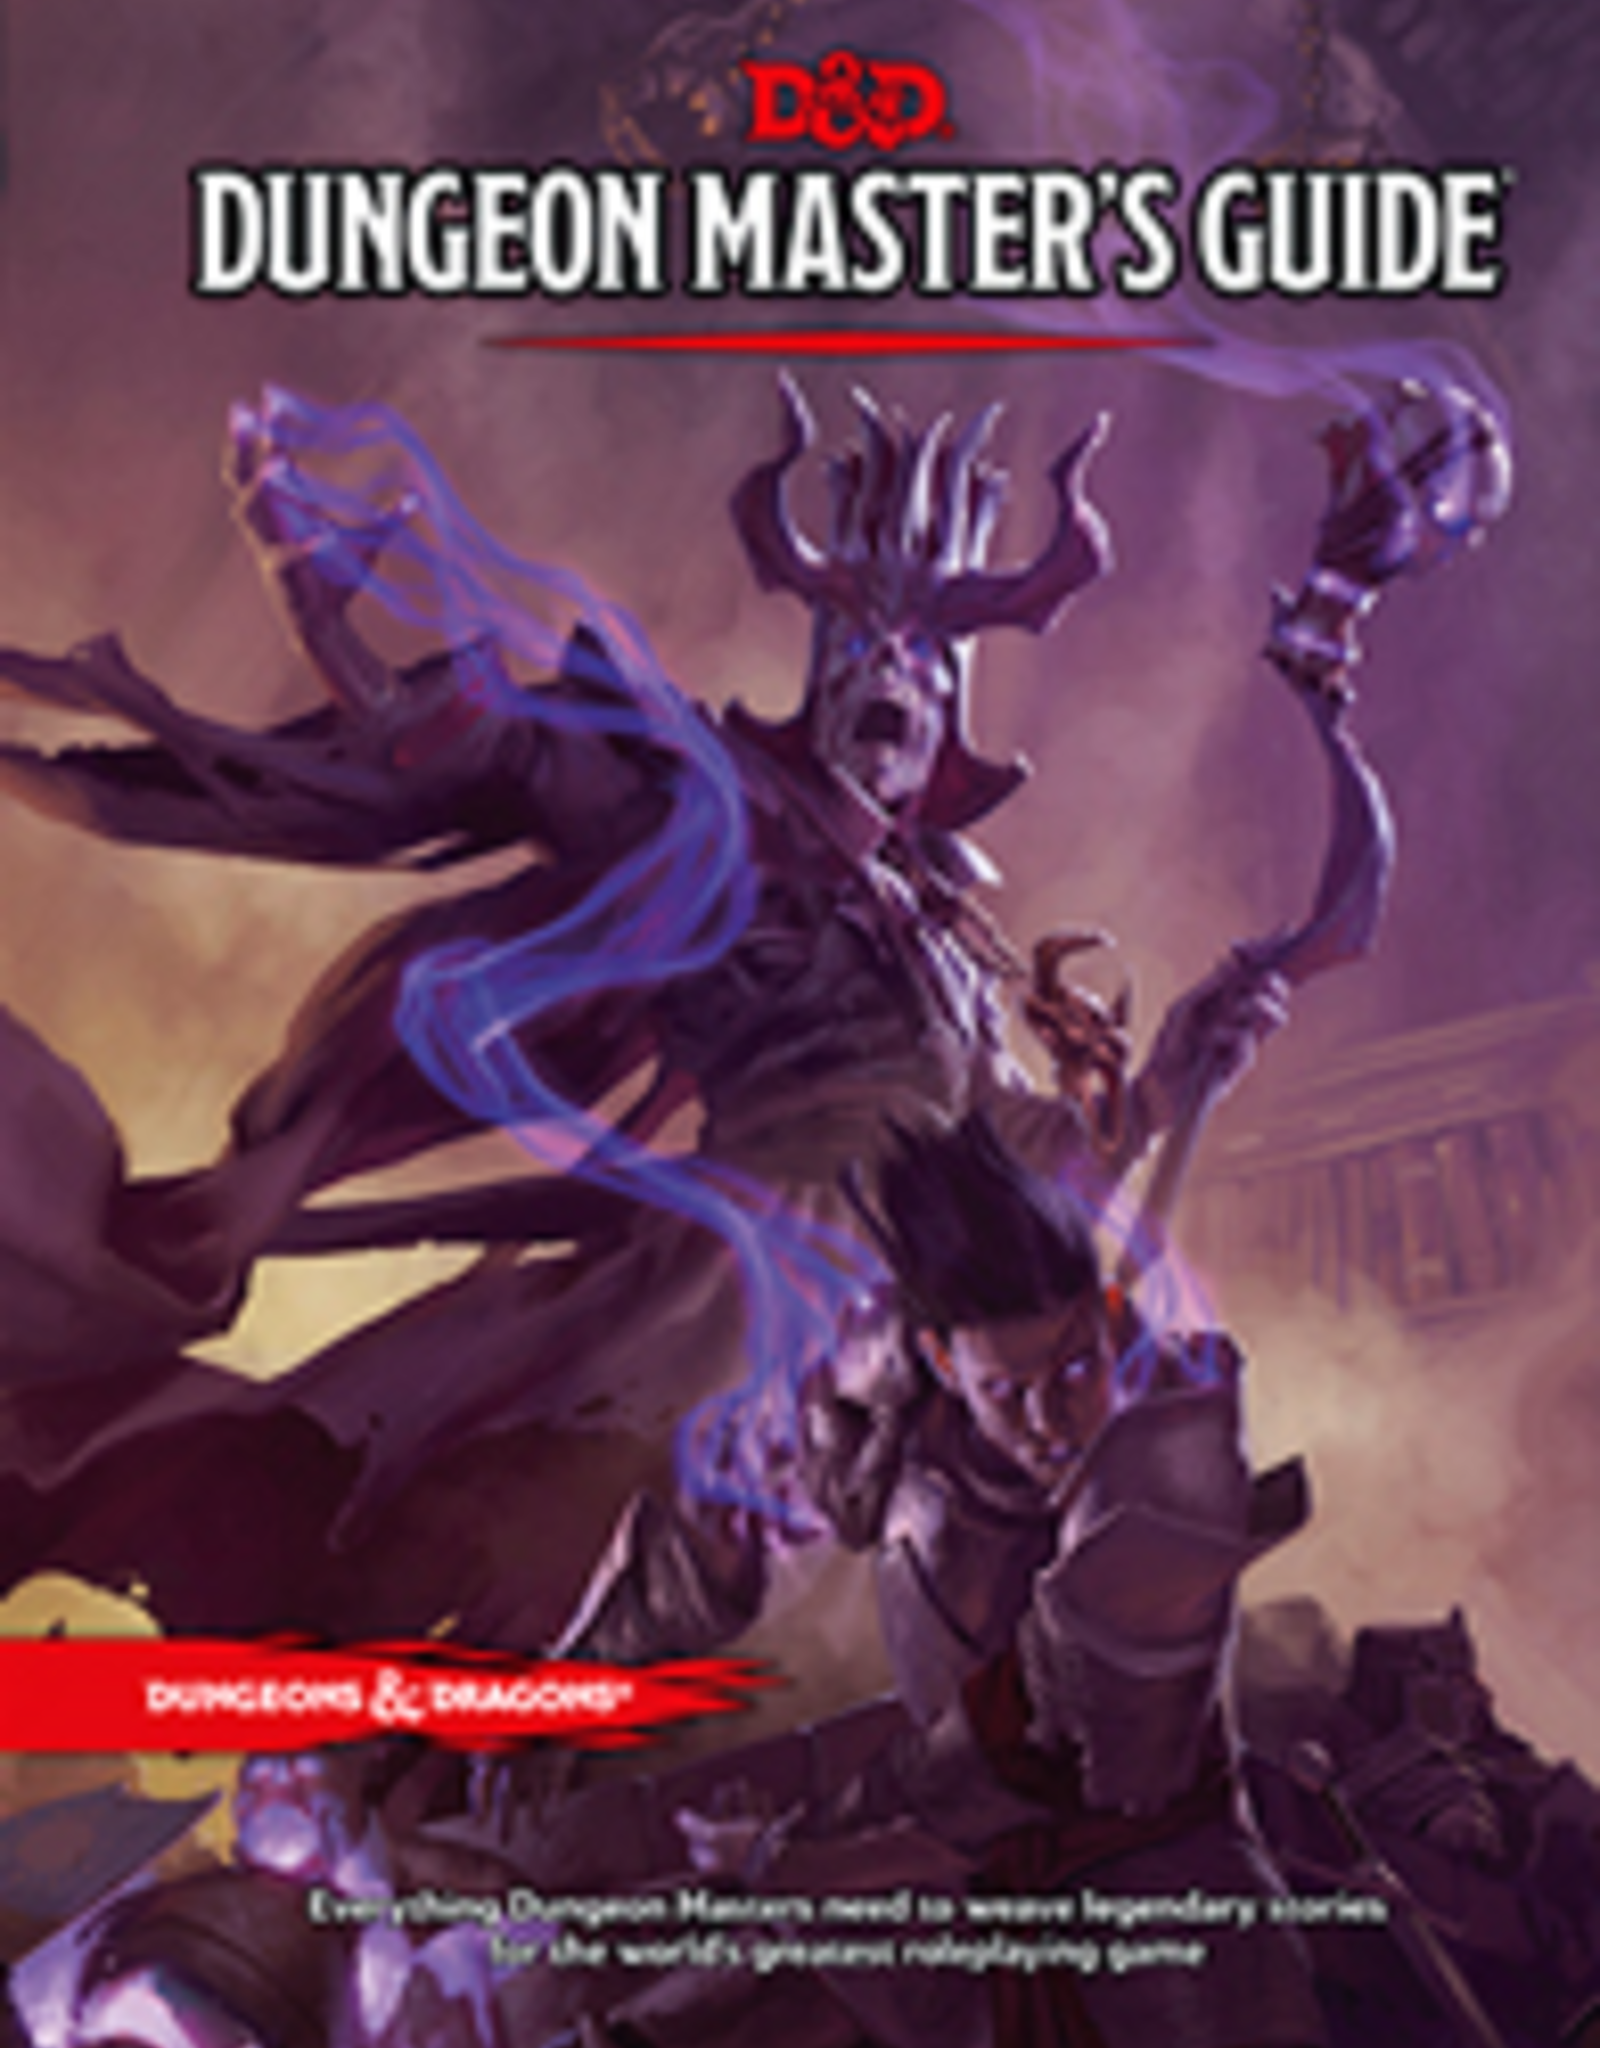 Wizards of the Coast Dungeons & Dragons: Dungeon Master's Guide